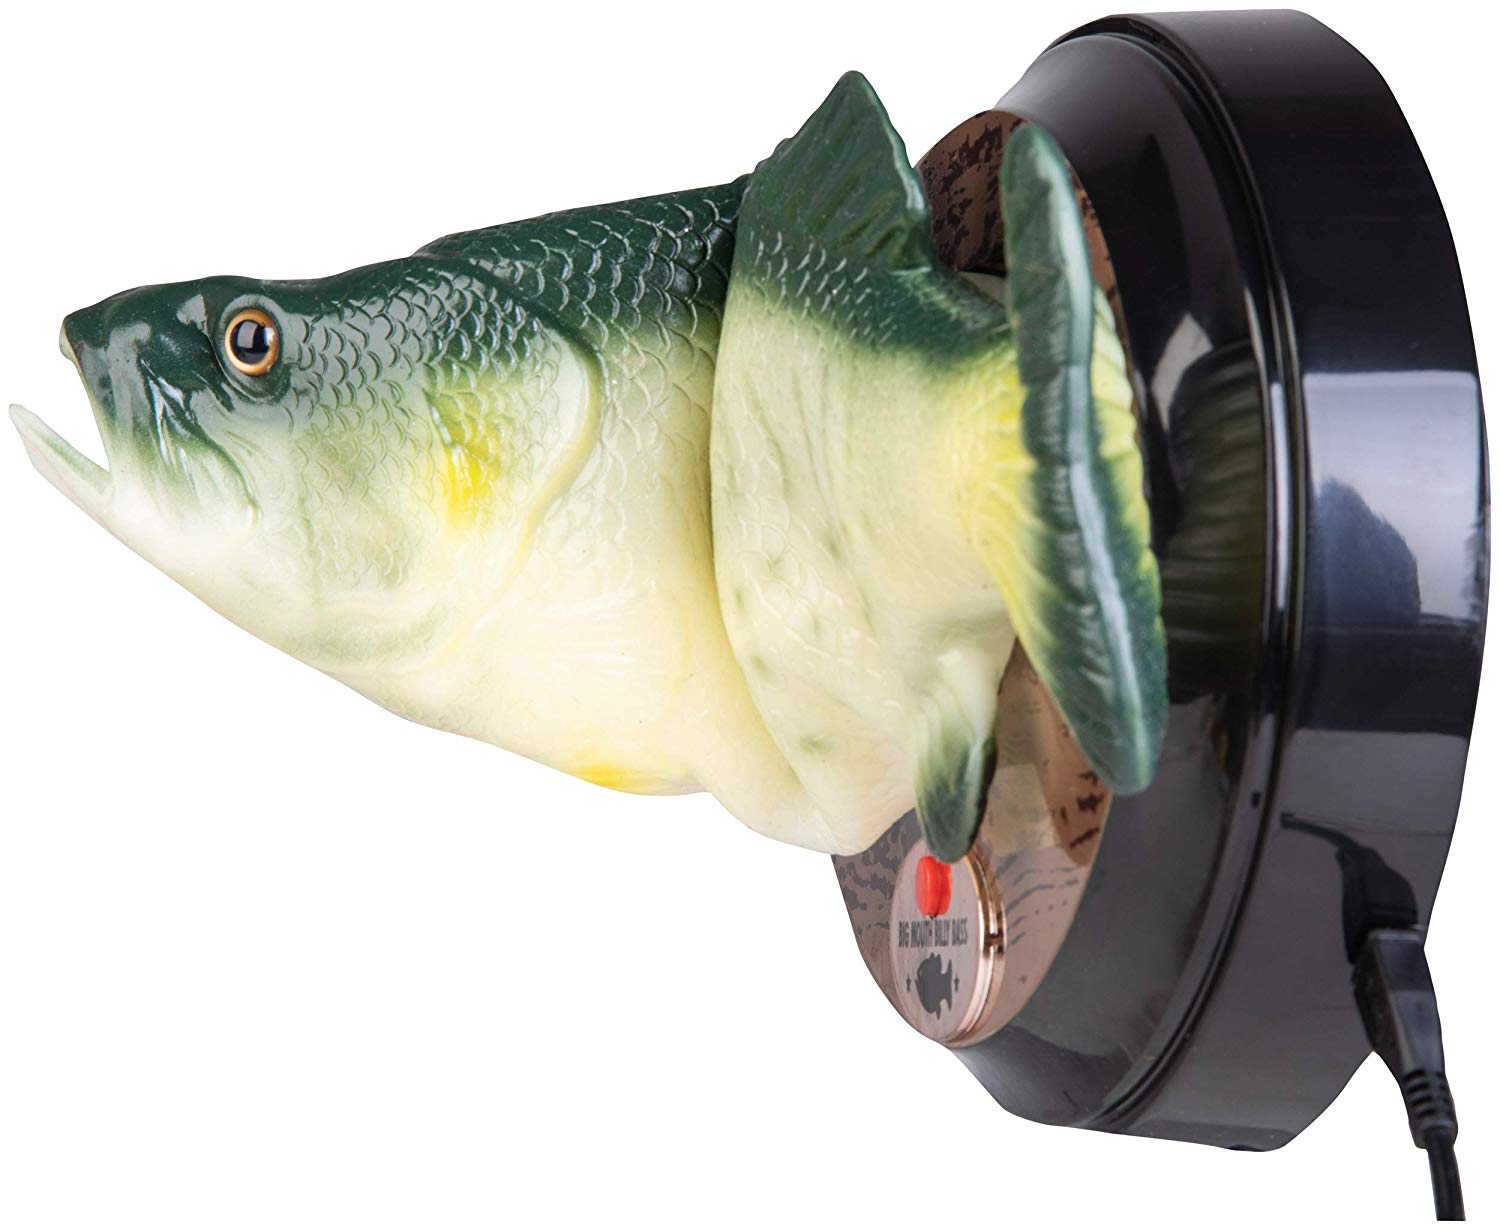 Big Mouth Billy Bass Compatible with Alexa